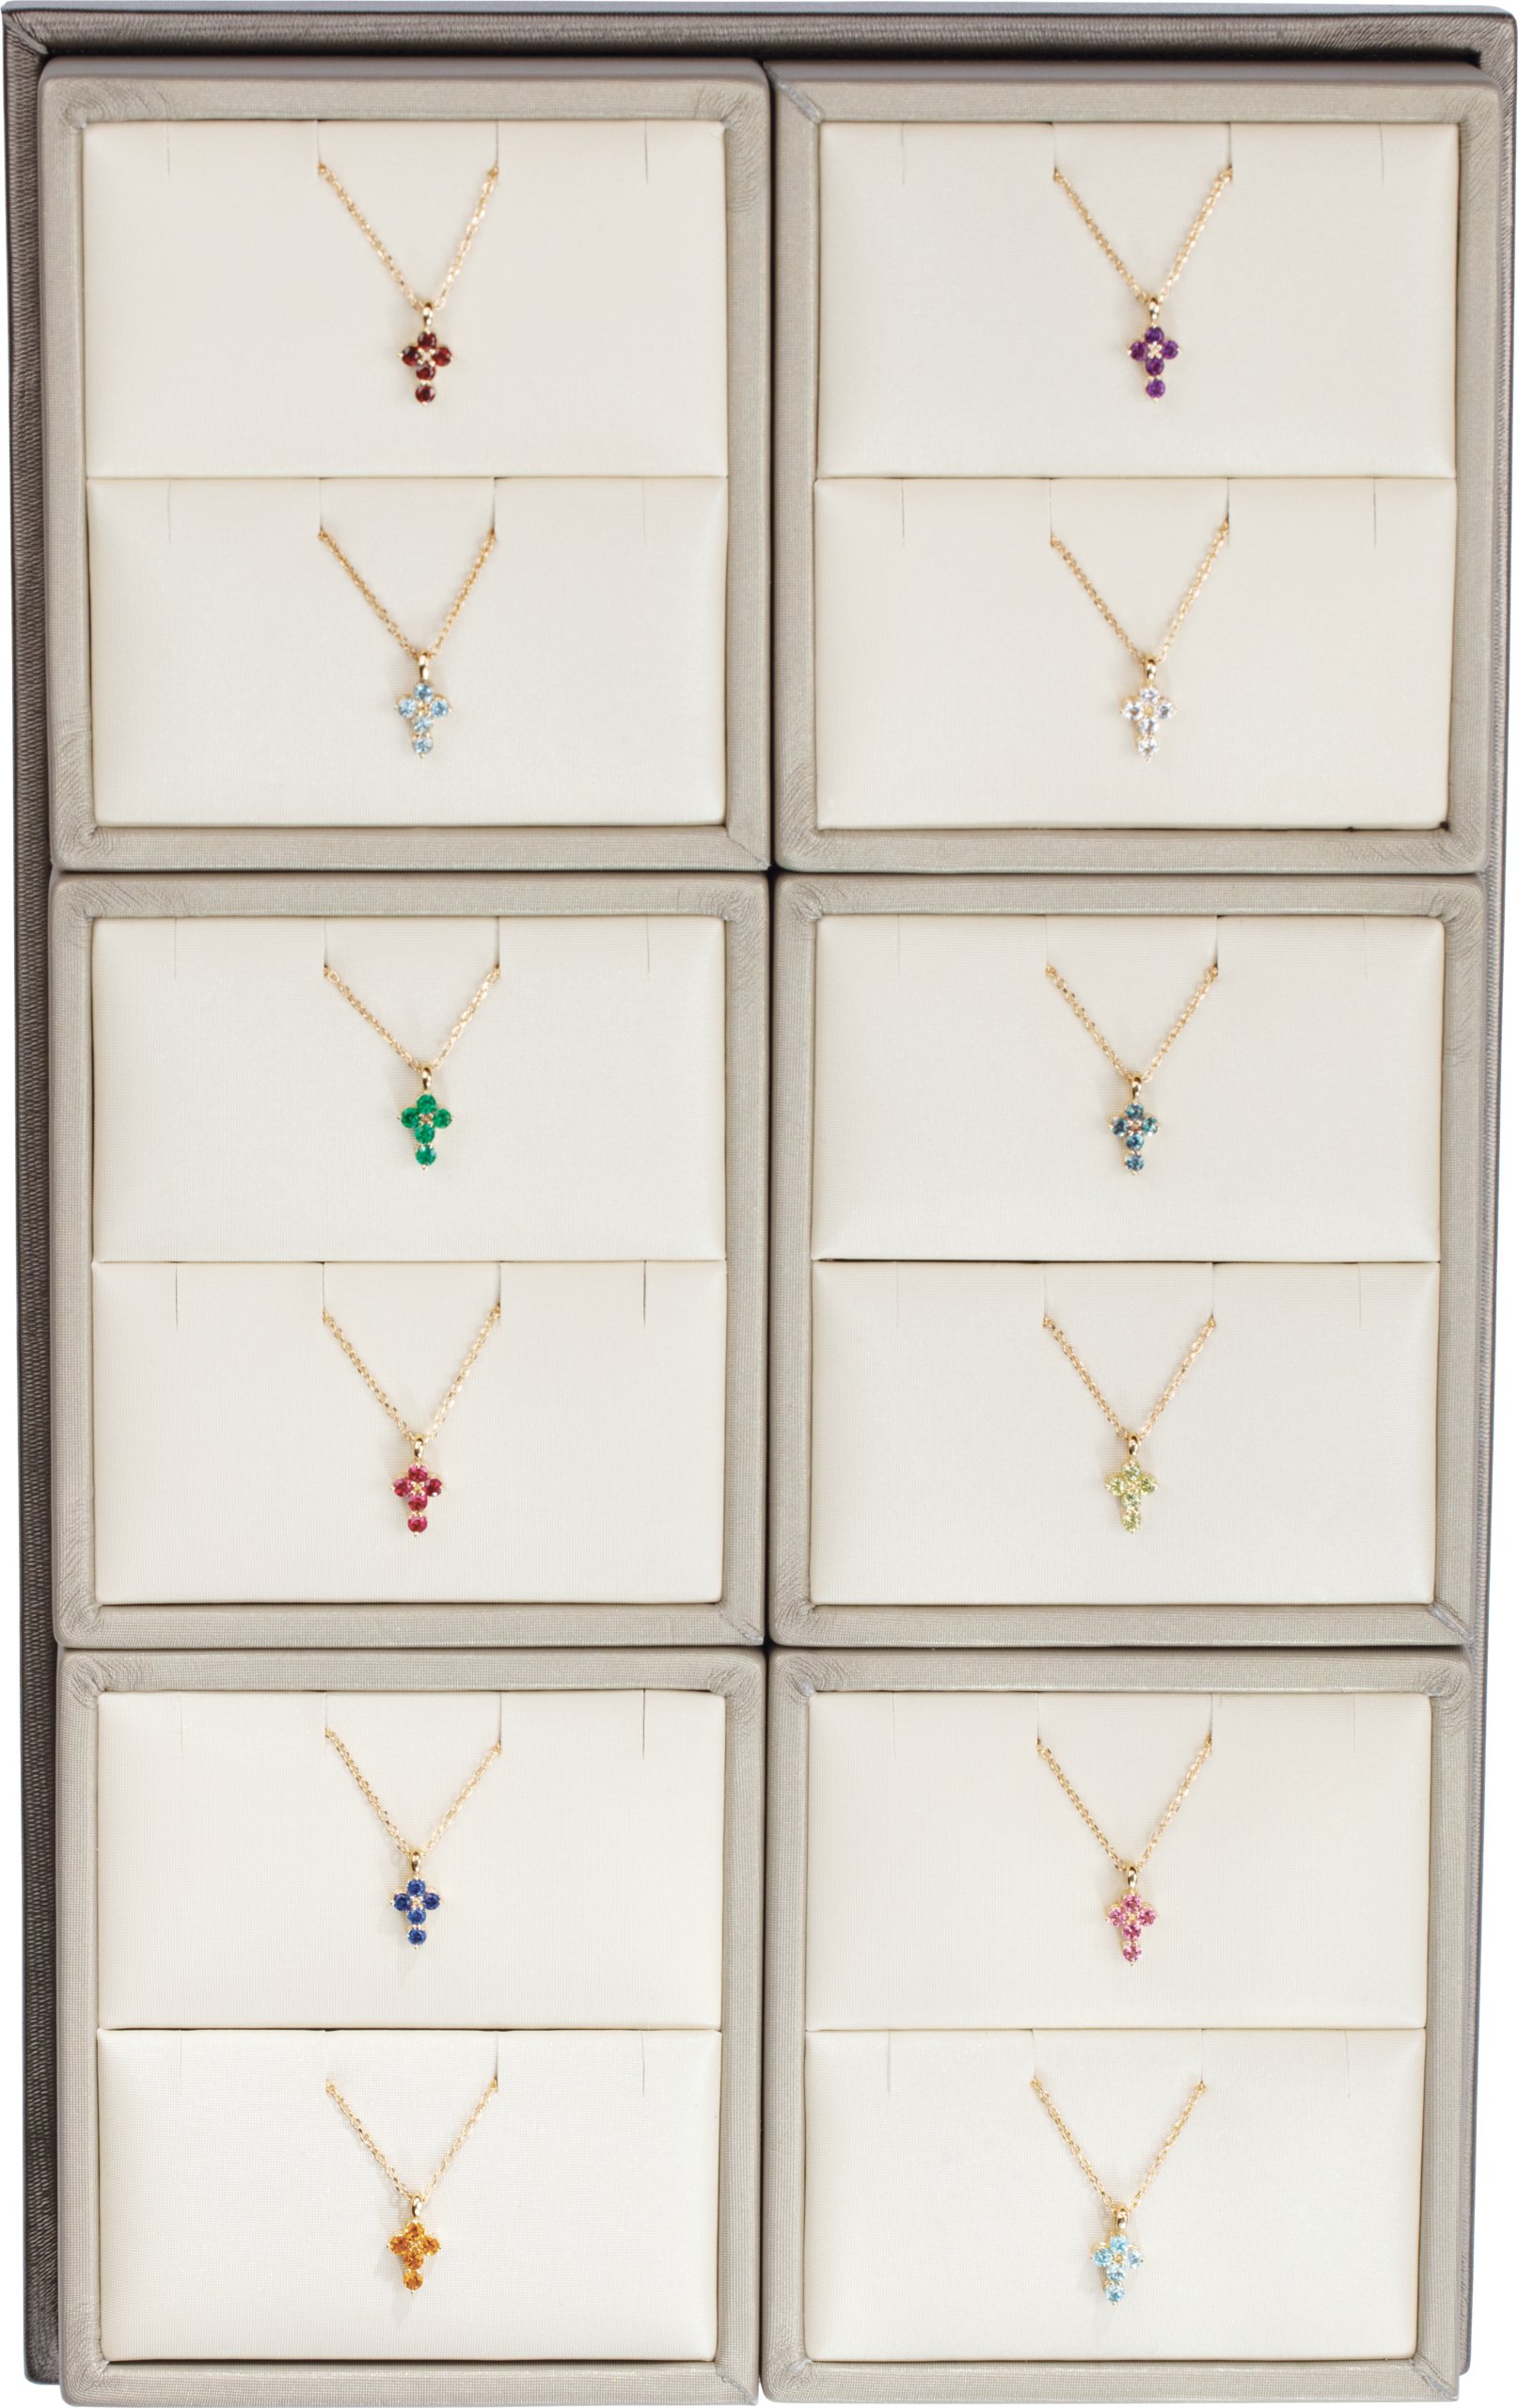 Birthstone Cross Necklace Selling System